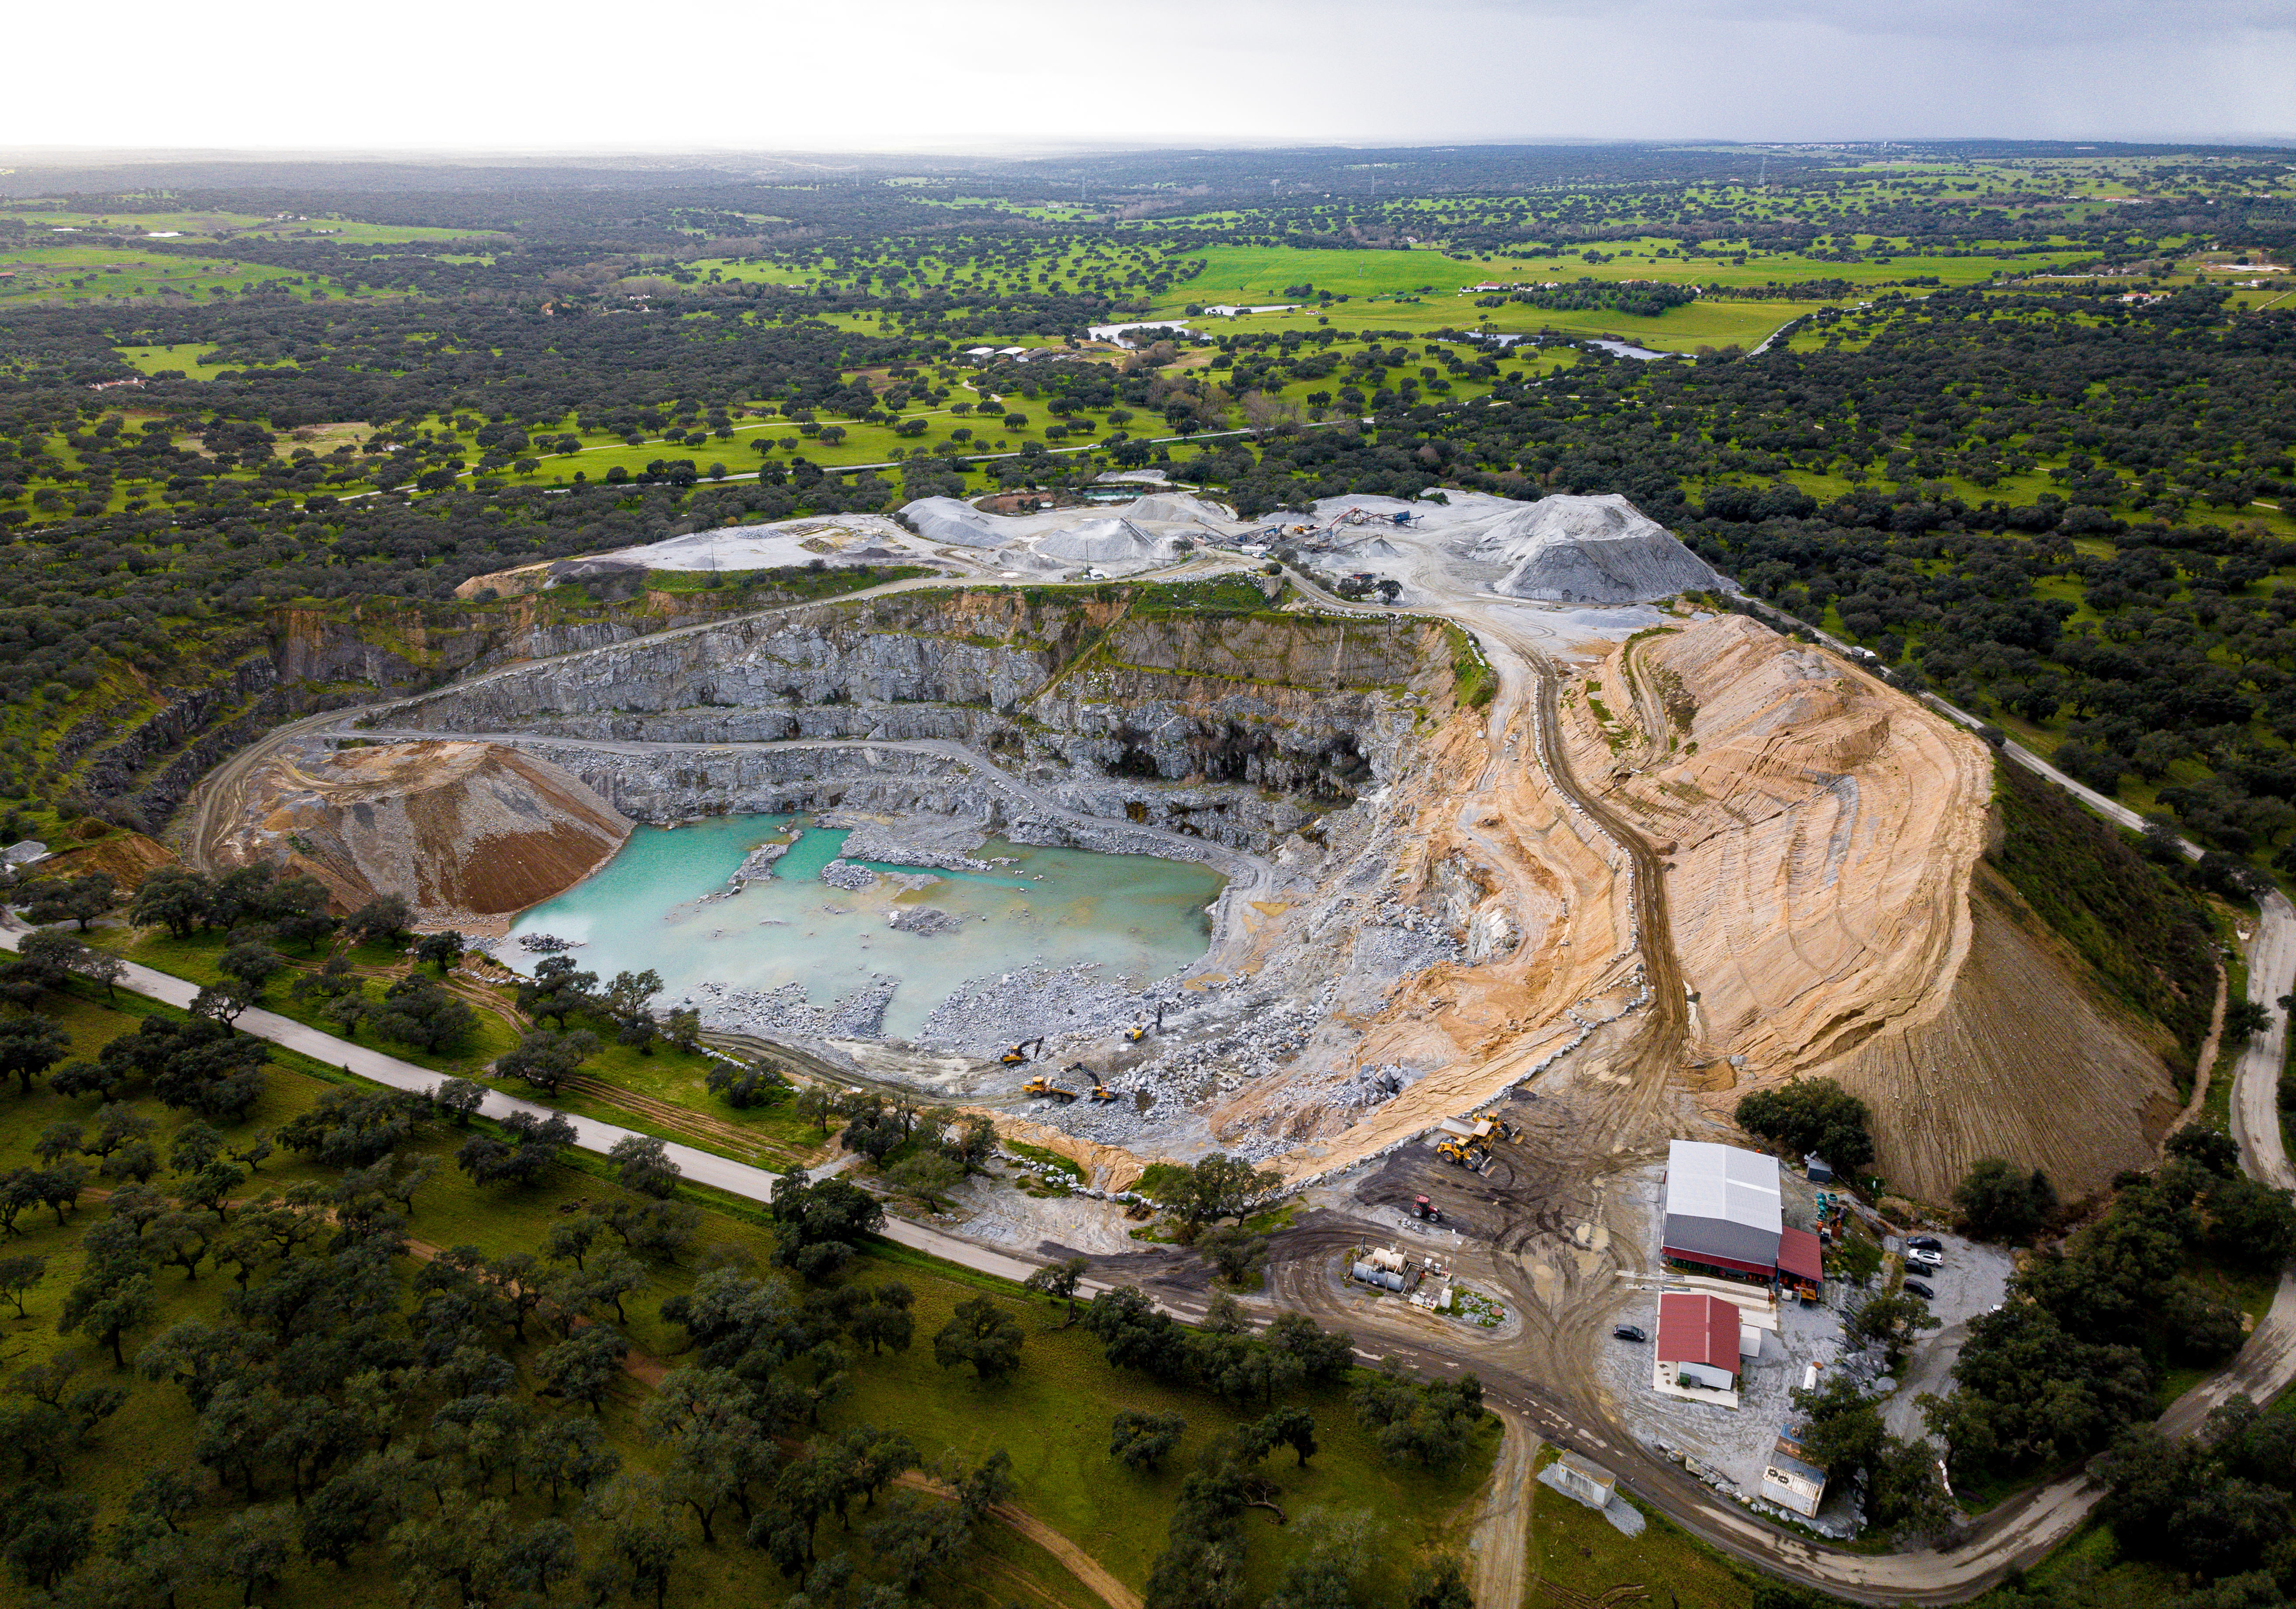 Aerial view of the Herdade de Benafessim quarry, owned by Mota Engil S.A. in Portugal.